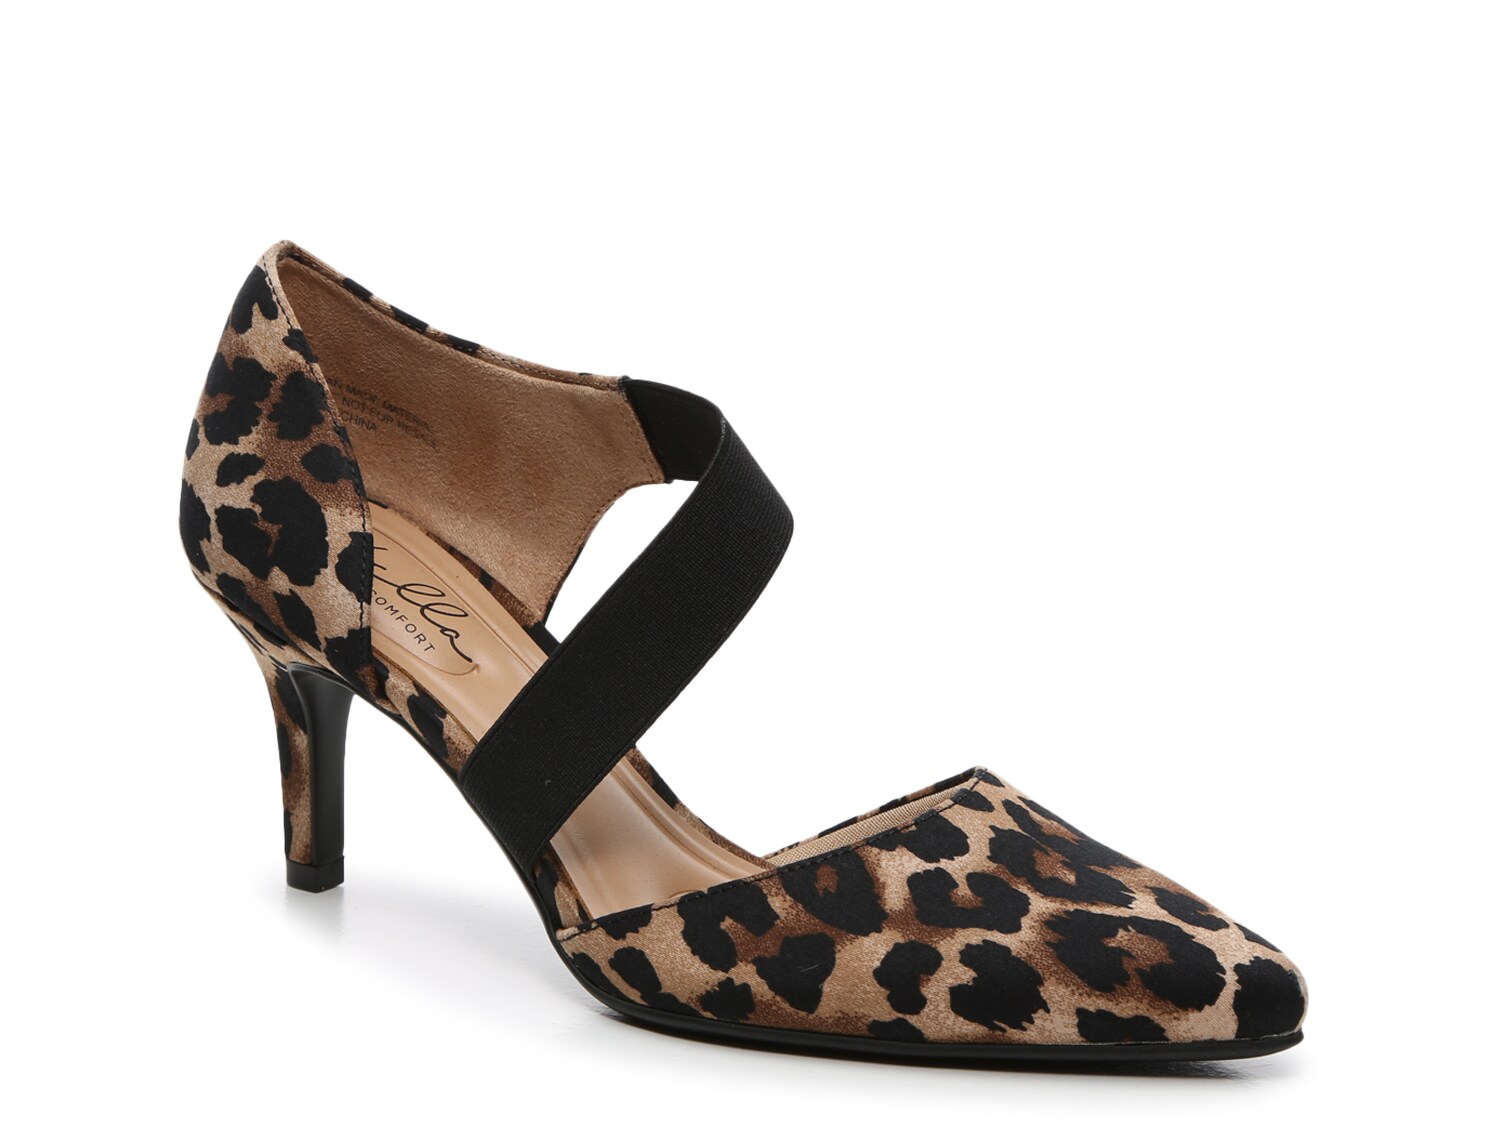 dsw shoes online shopping